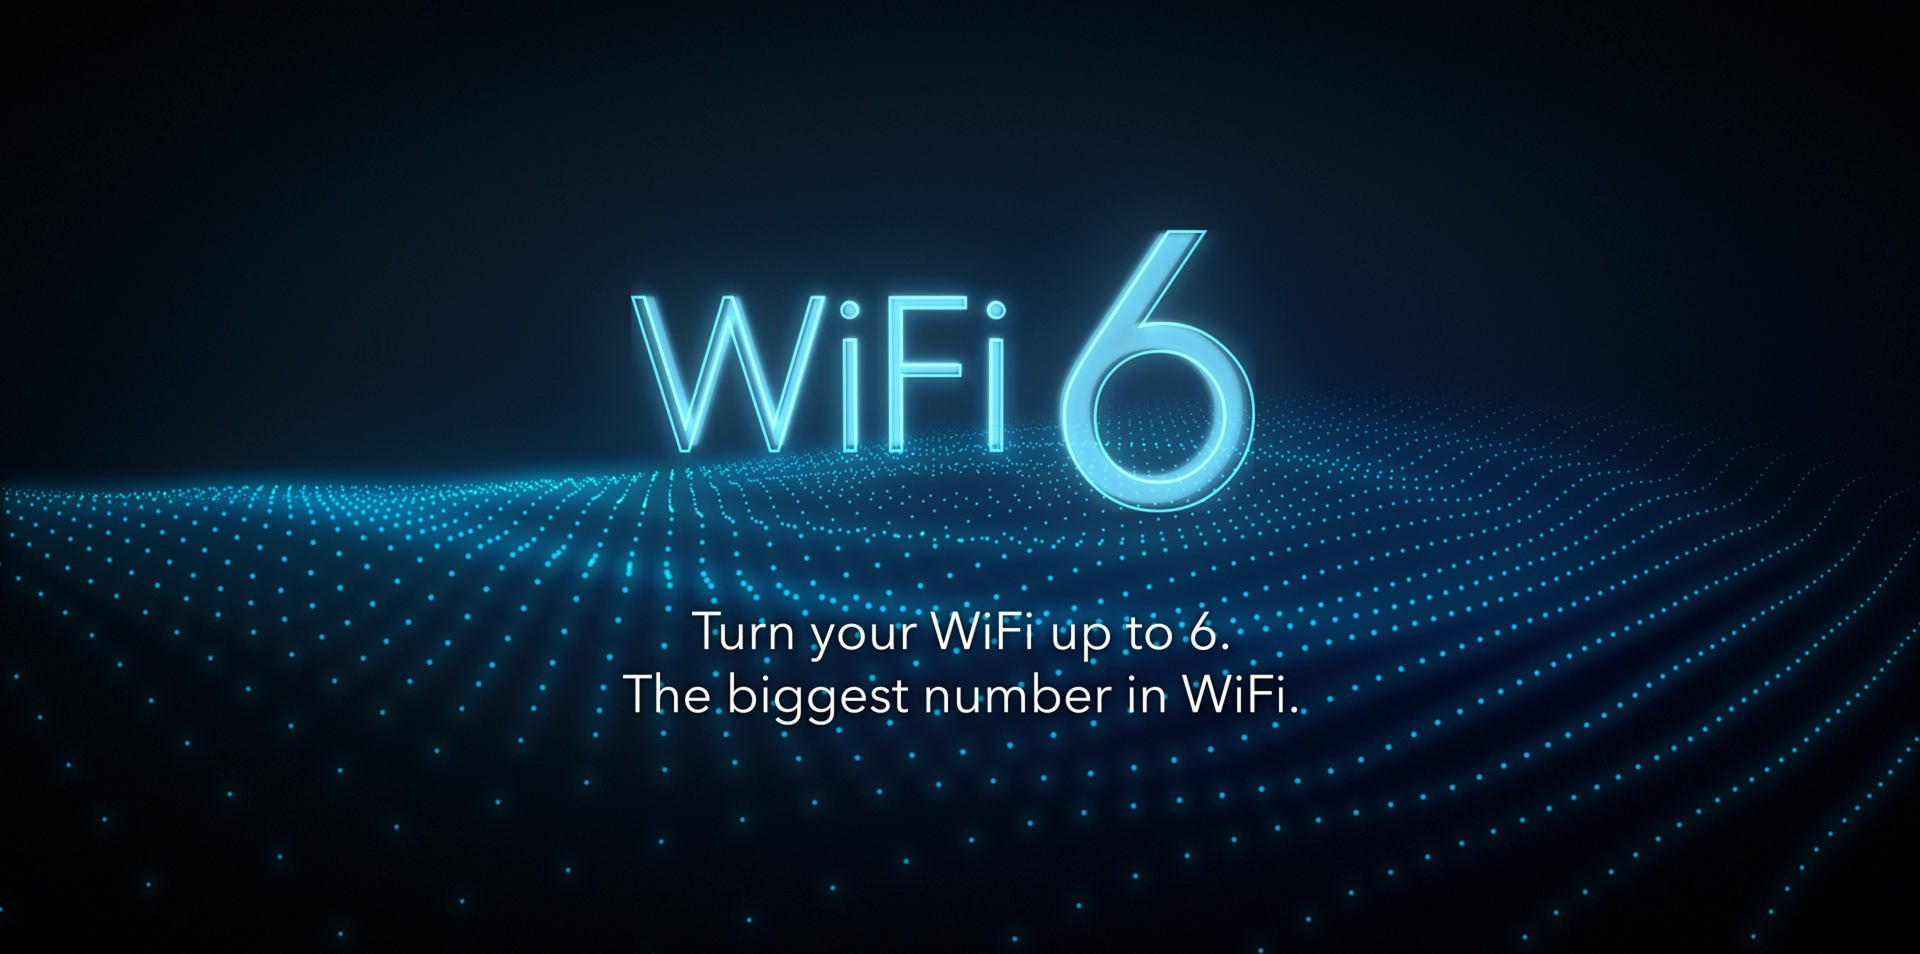 Wi-Fi 6: What Is It and Do You Need to Upgrade?